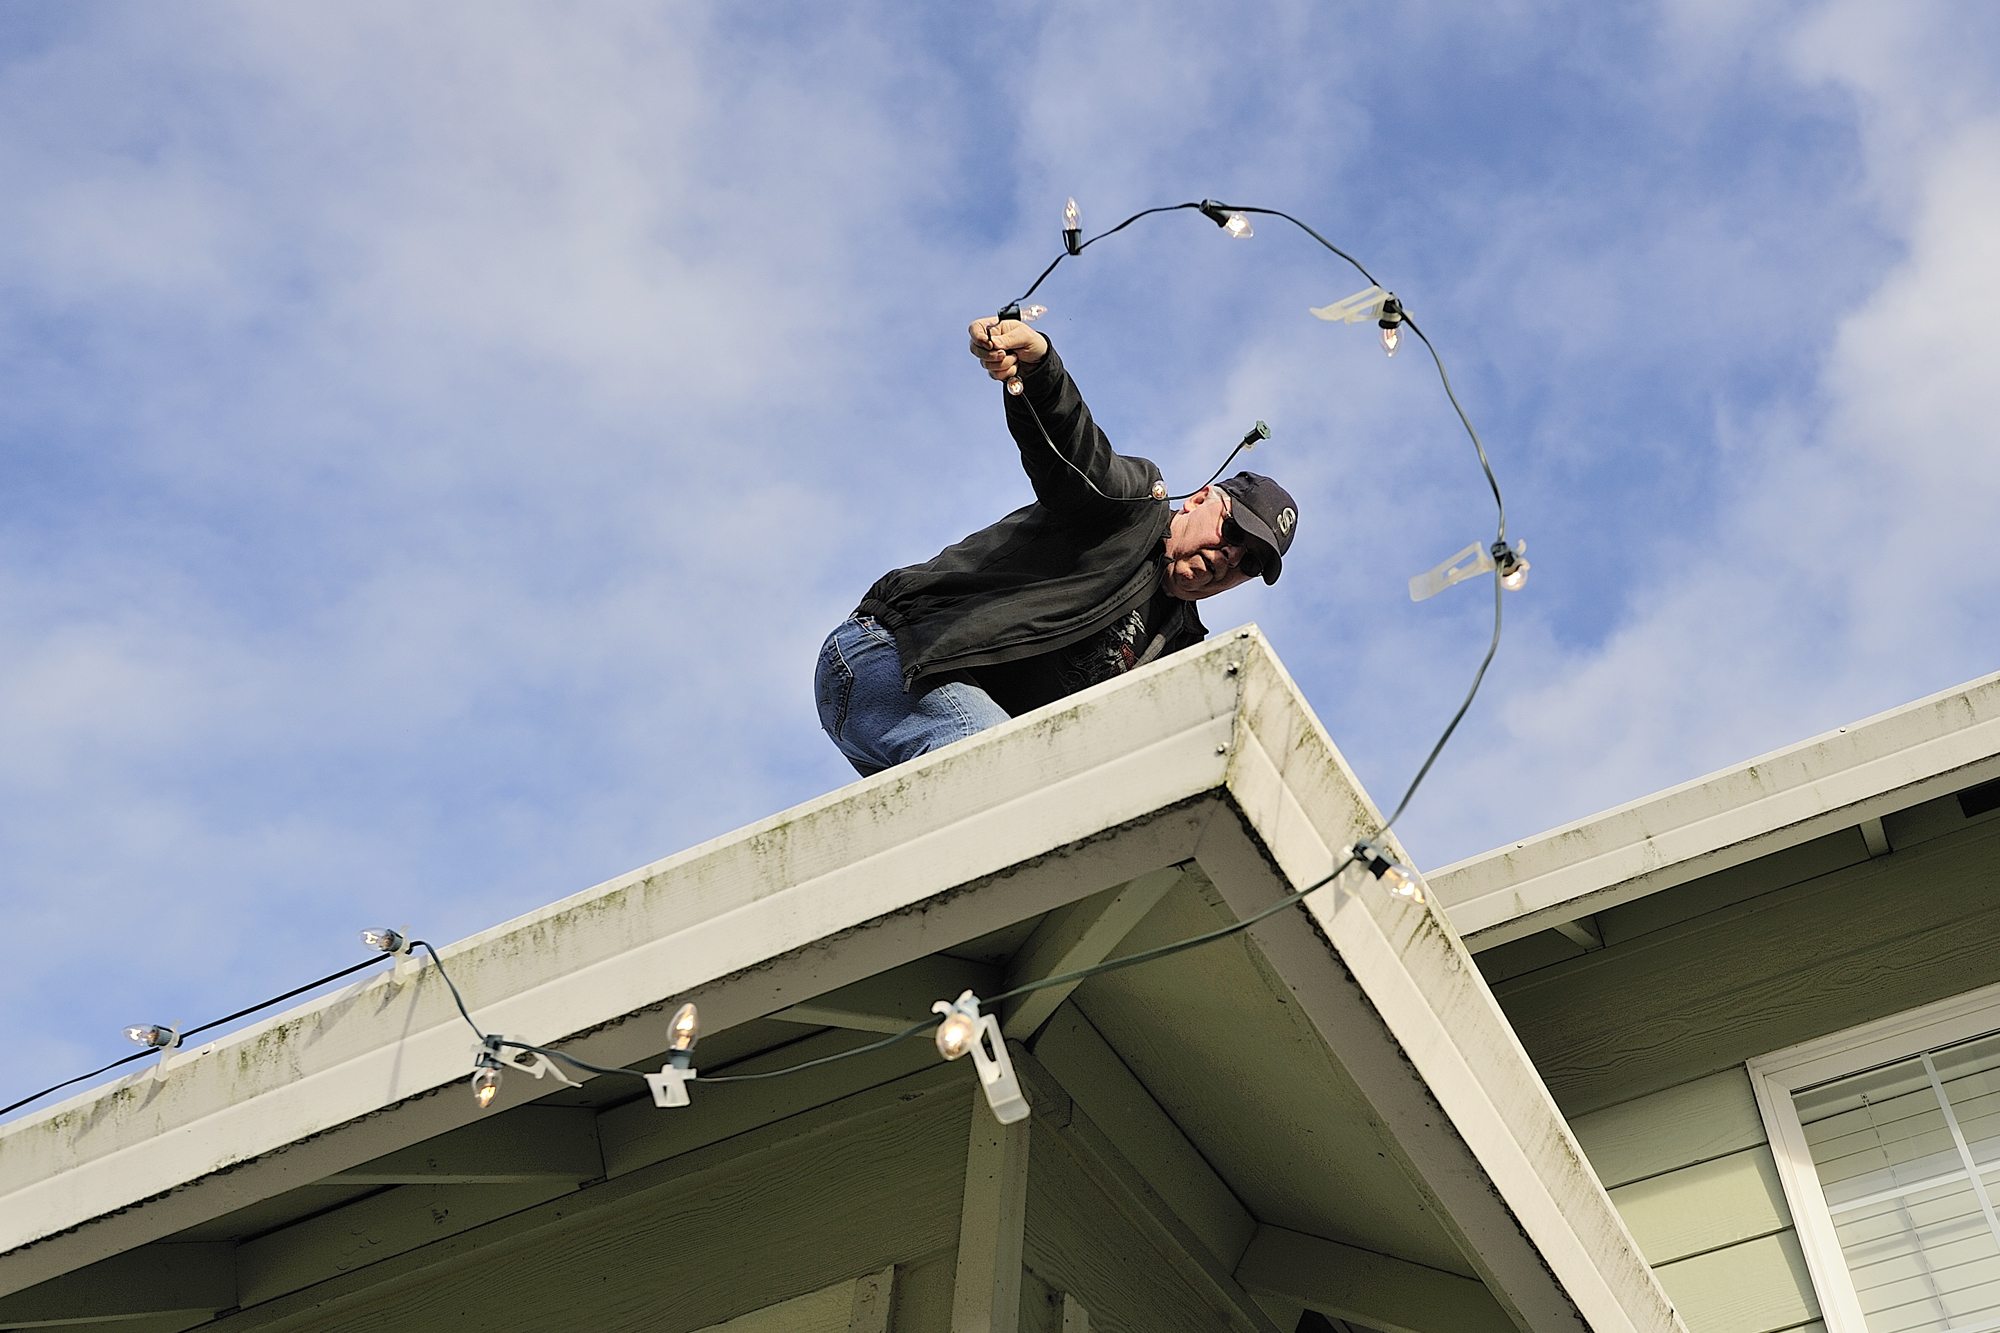 Art Rairdon takes advantage of what was forecast to be the last dry day this week to put up his Christmas lights. &quot;I should have put them up yesterday,&quot; said Rairdon.